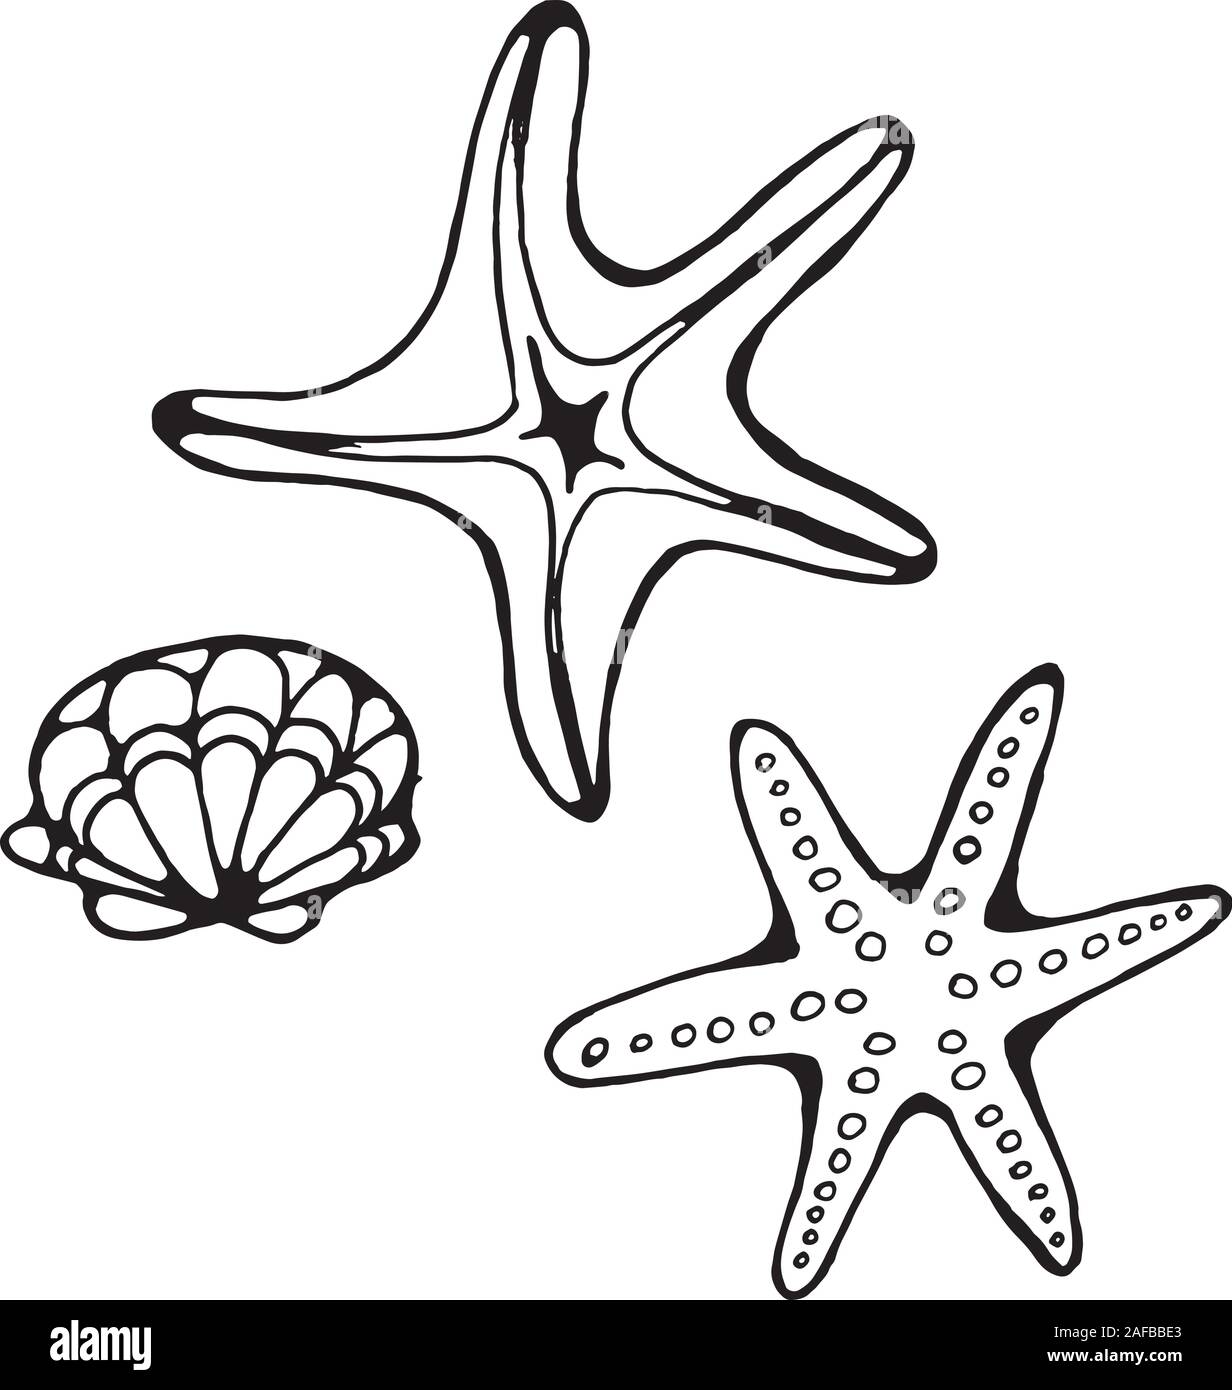 Starfish Tattoo Design Variations Ideas And Meanings